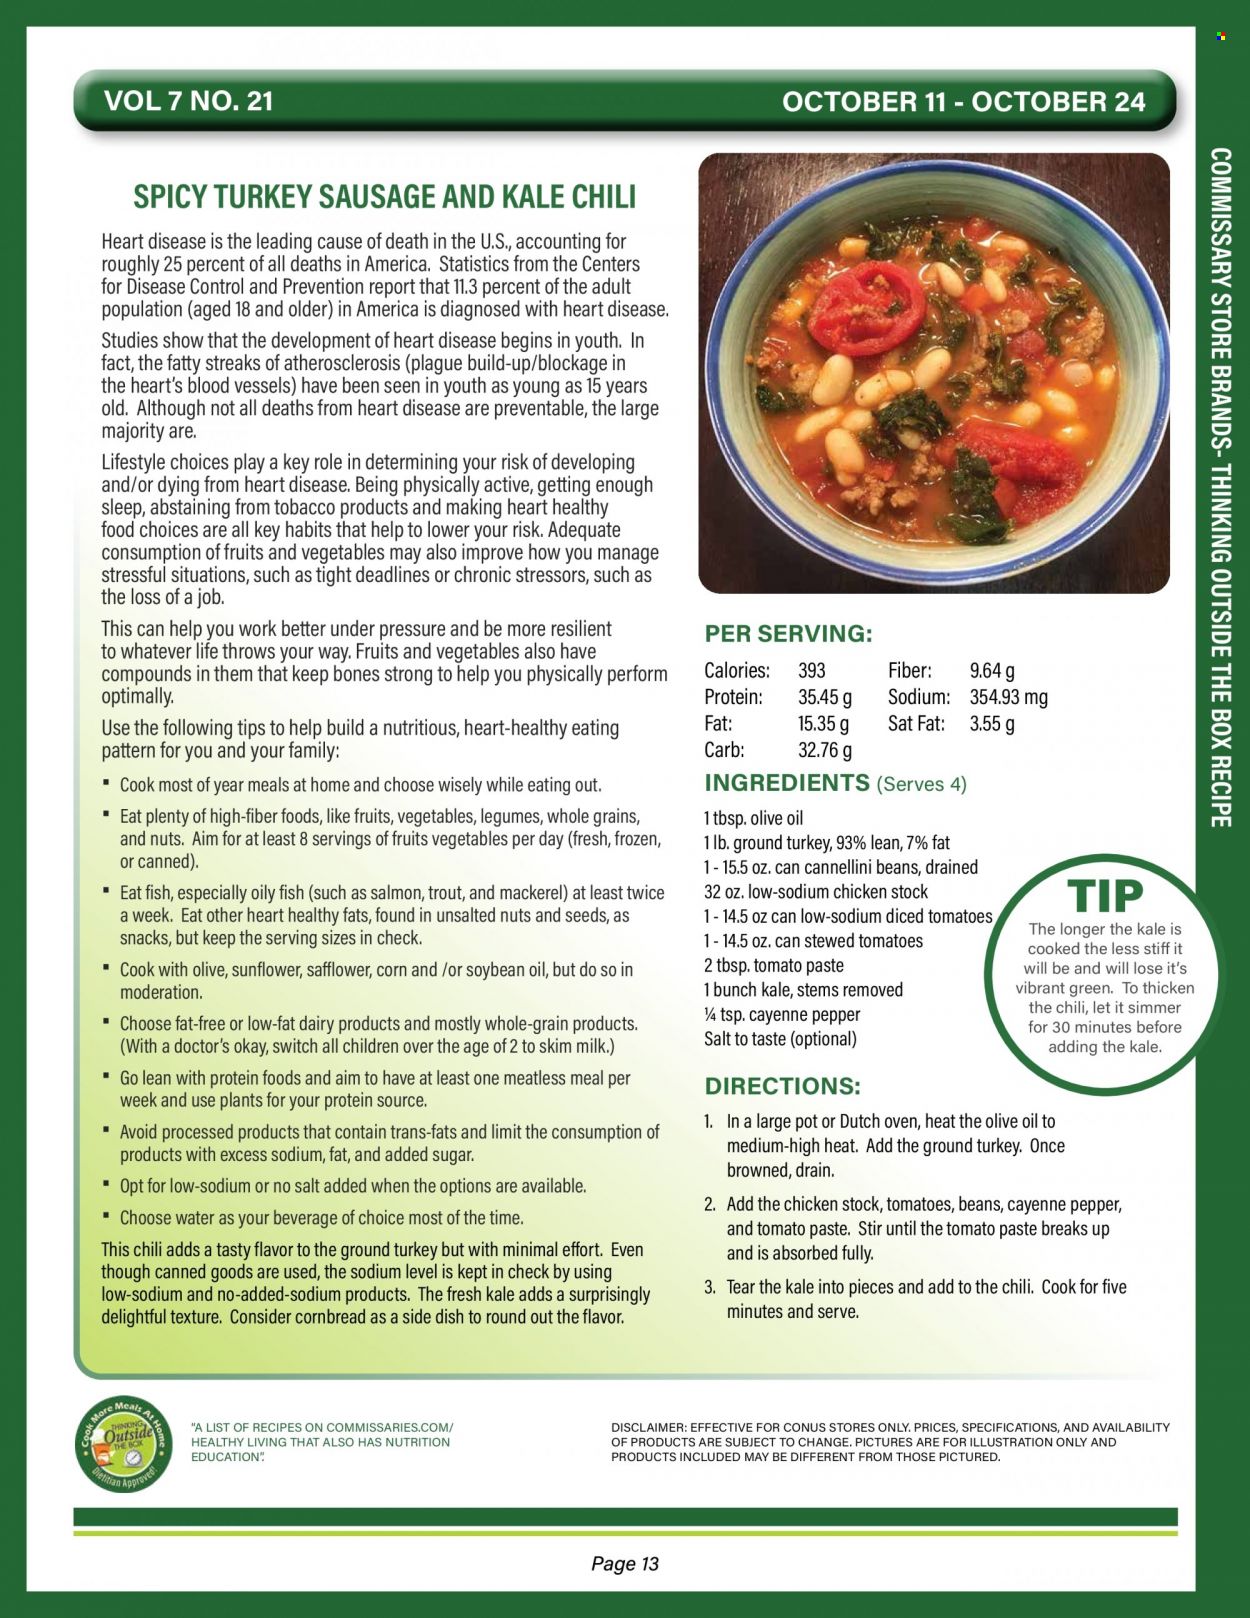 thumbnail - Commissary Flyer - 10/11/2021 - 10/24/2021 - Sales products - corn bread, kale, mackerel, salmon, trout, fish, sausage, milk, snack, cannellini beans, tomato paste, pepper, soya oil, olive oil, switch, ground turkey, Plenty. Page 13.